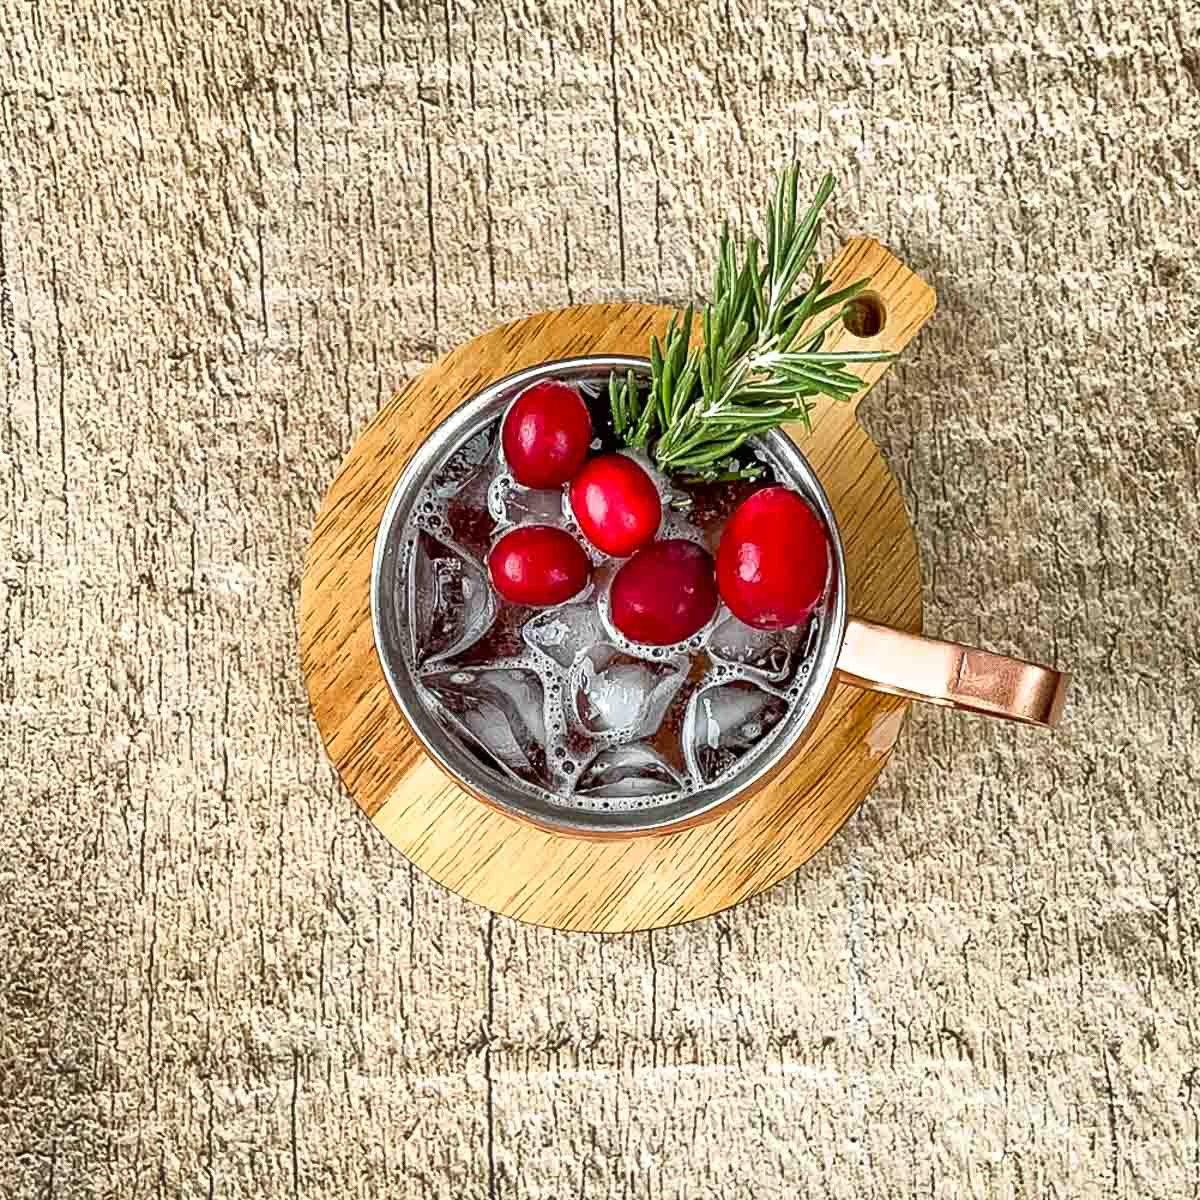 The cranberry mule garnished with fresh rosemary and fresh cranberries.